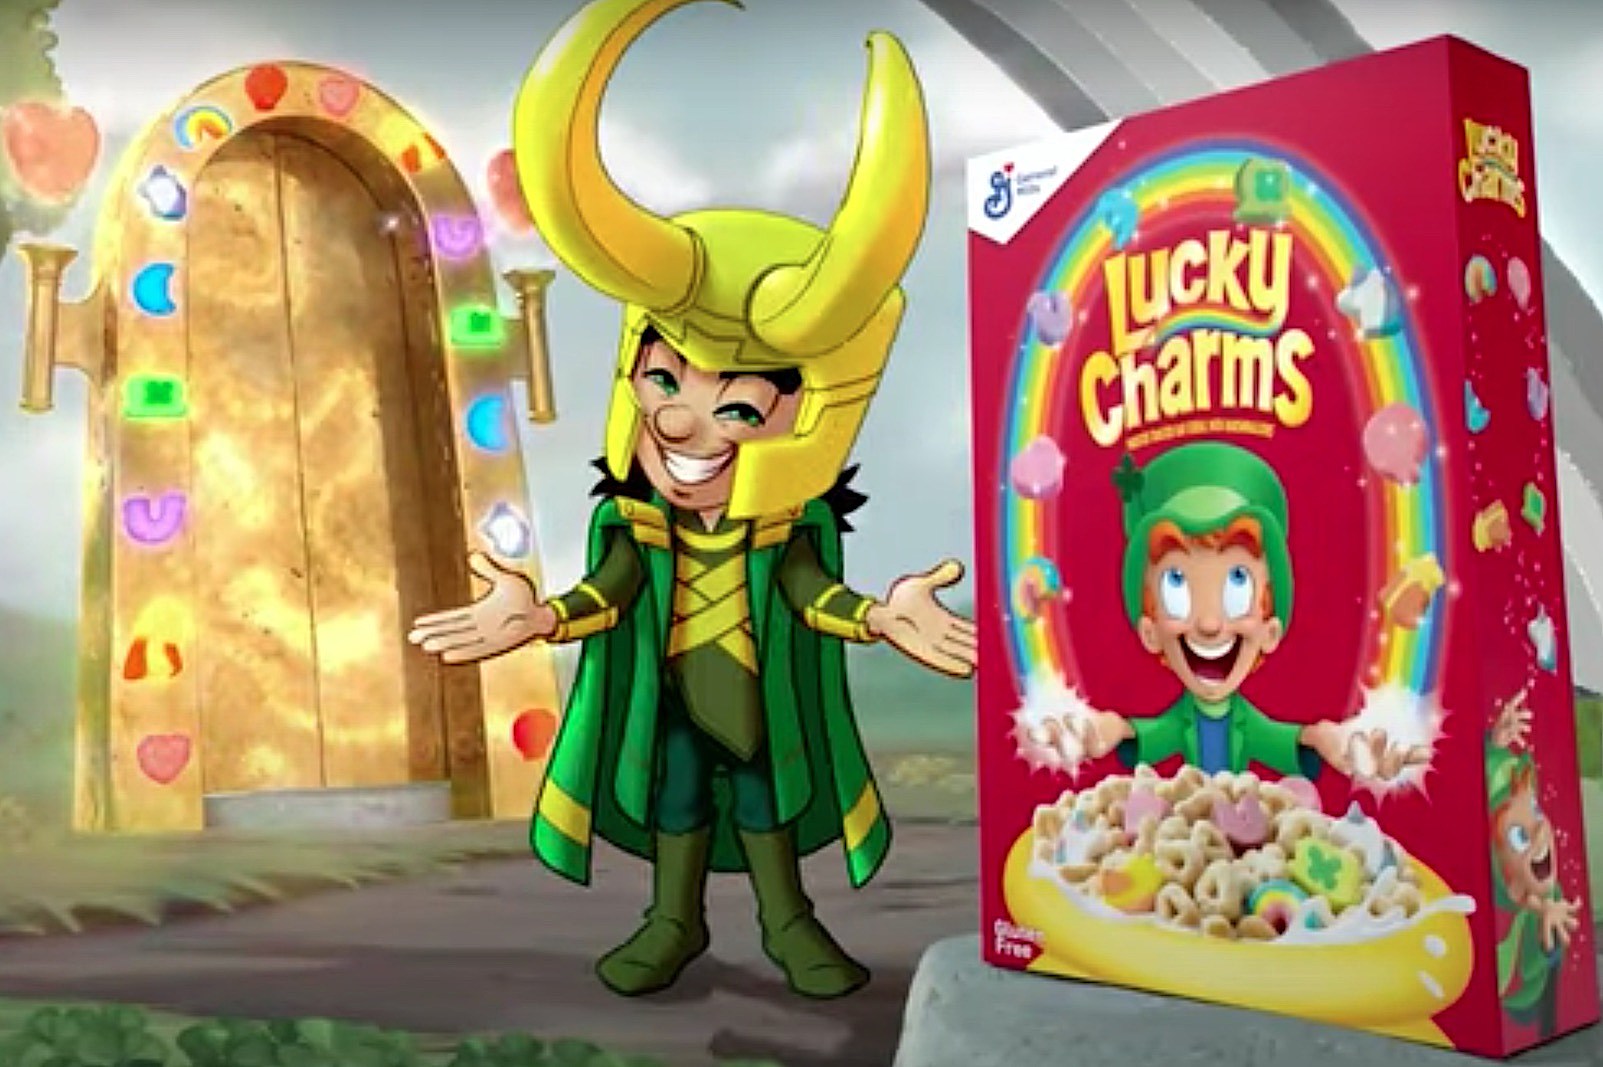 lucky charms mascot